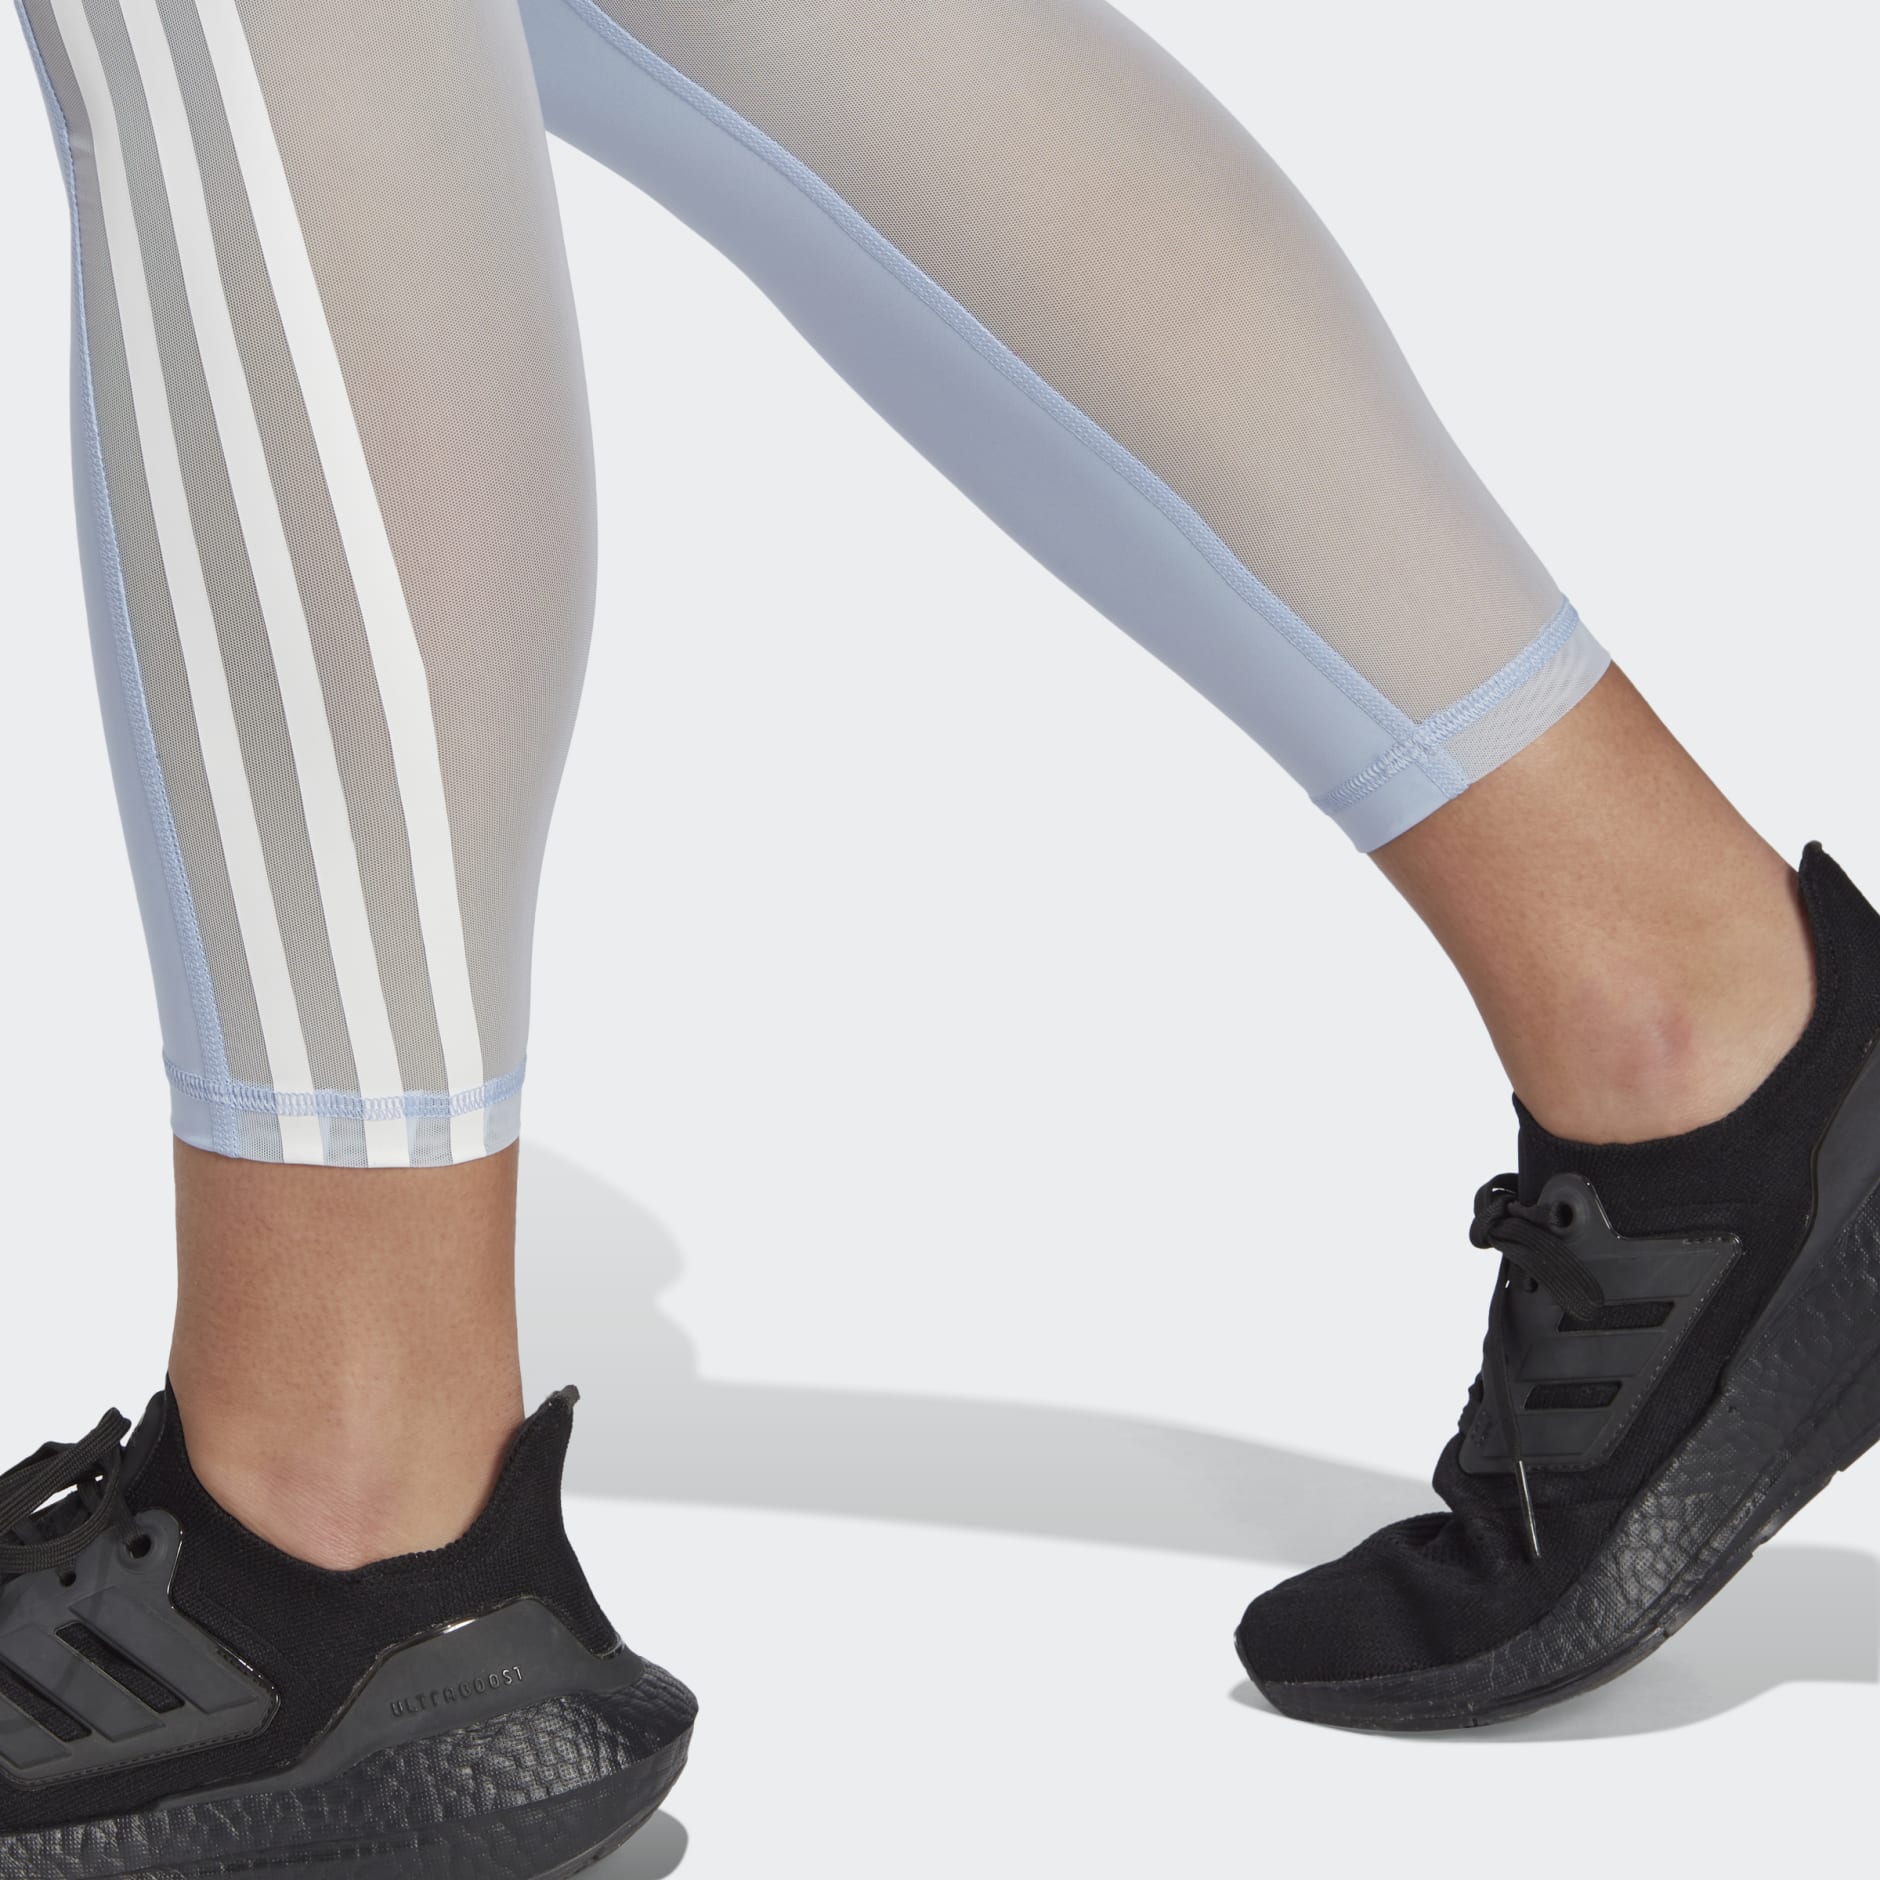 Others - Climawarm - Tights & Leggings - Sale | adidas US